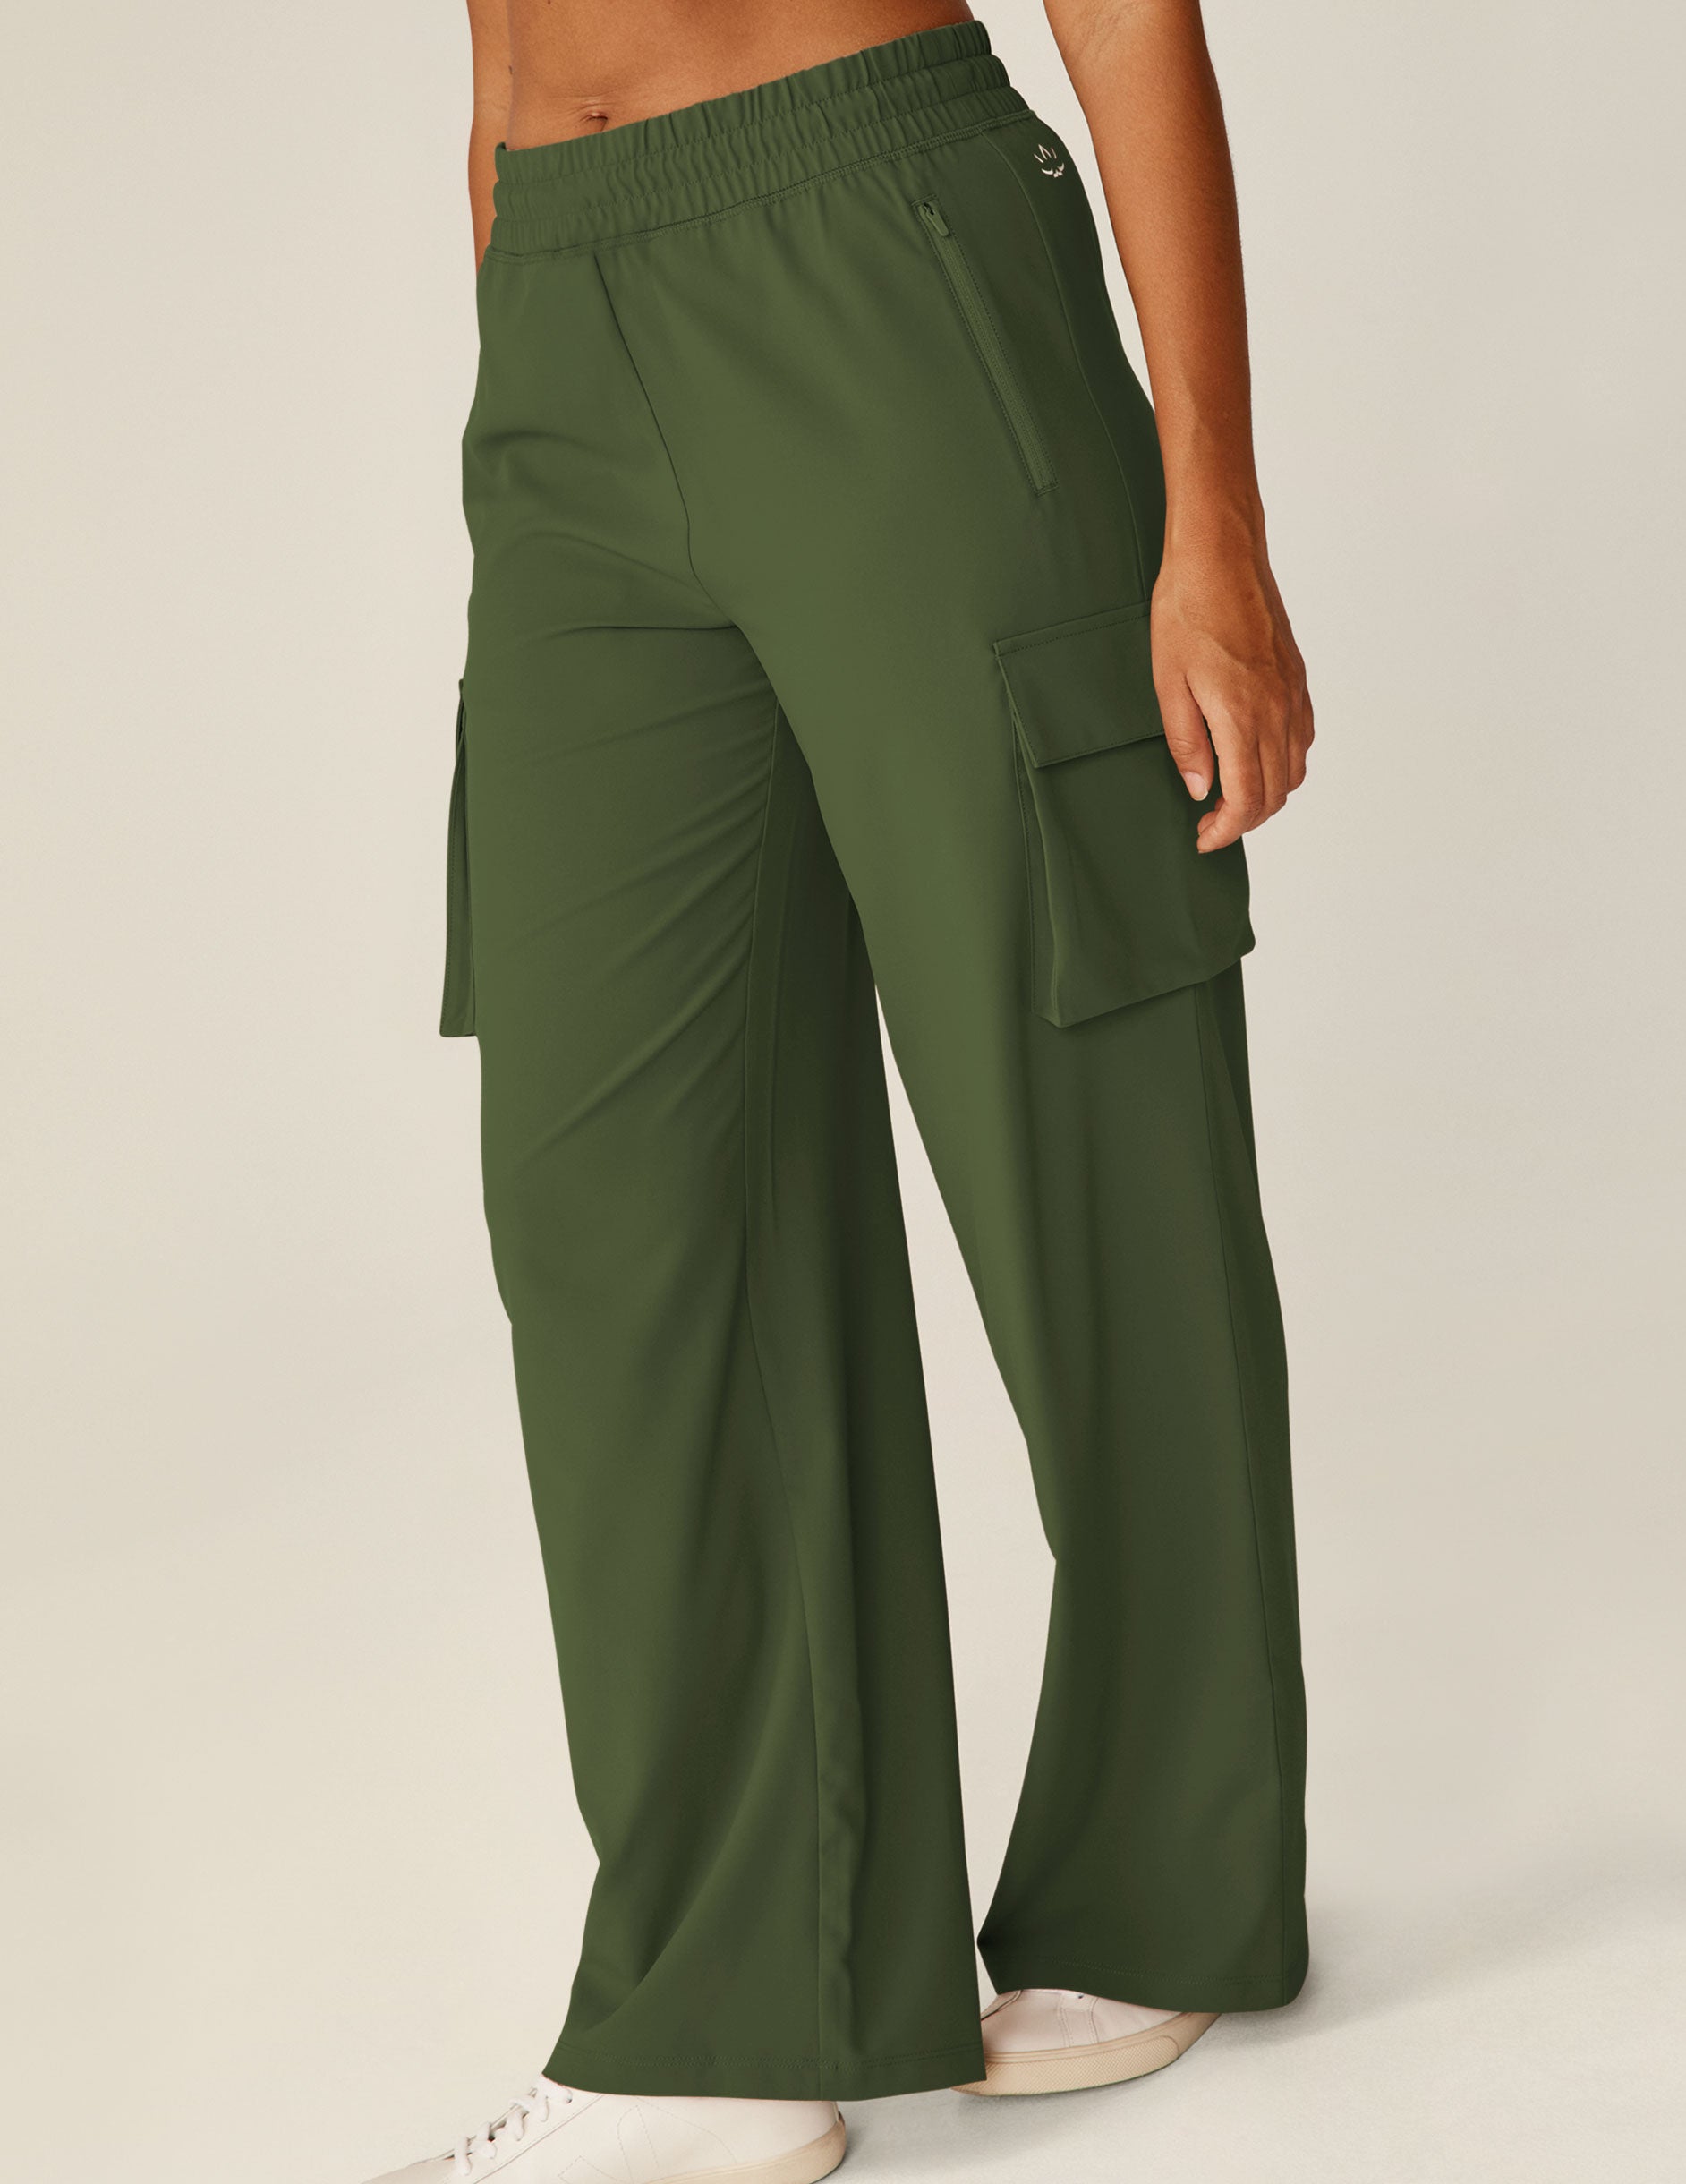 green jetstretch pants with cargo style pockets on the side of each leg.